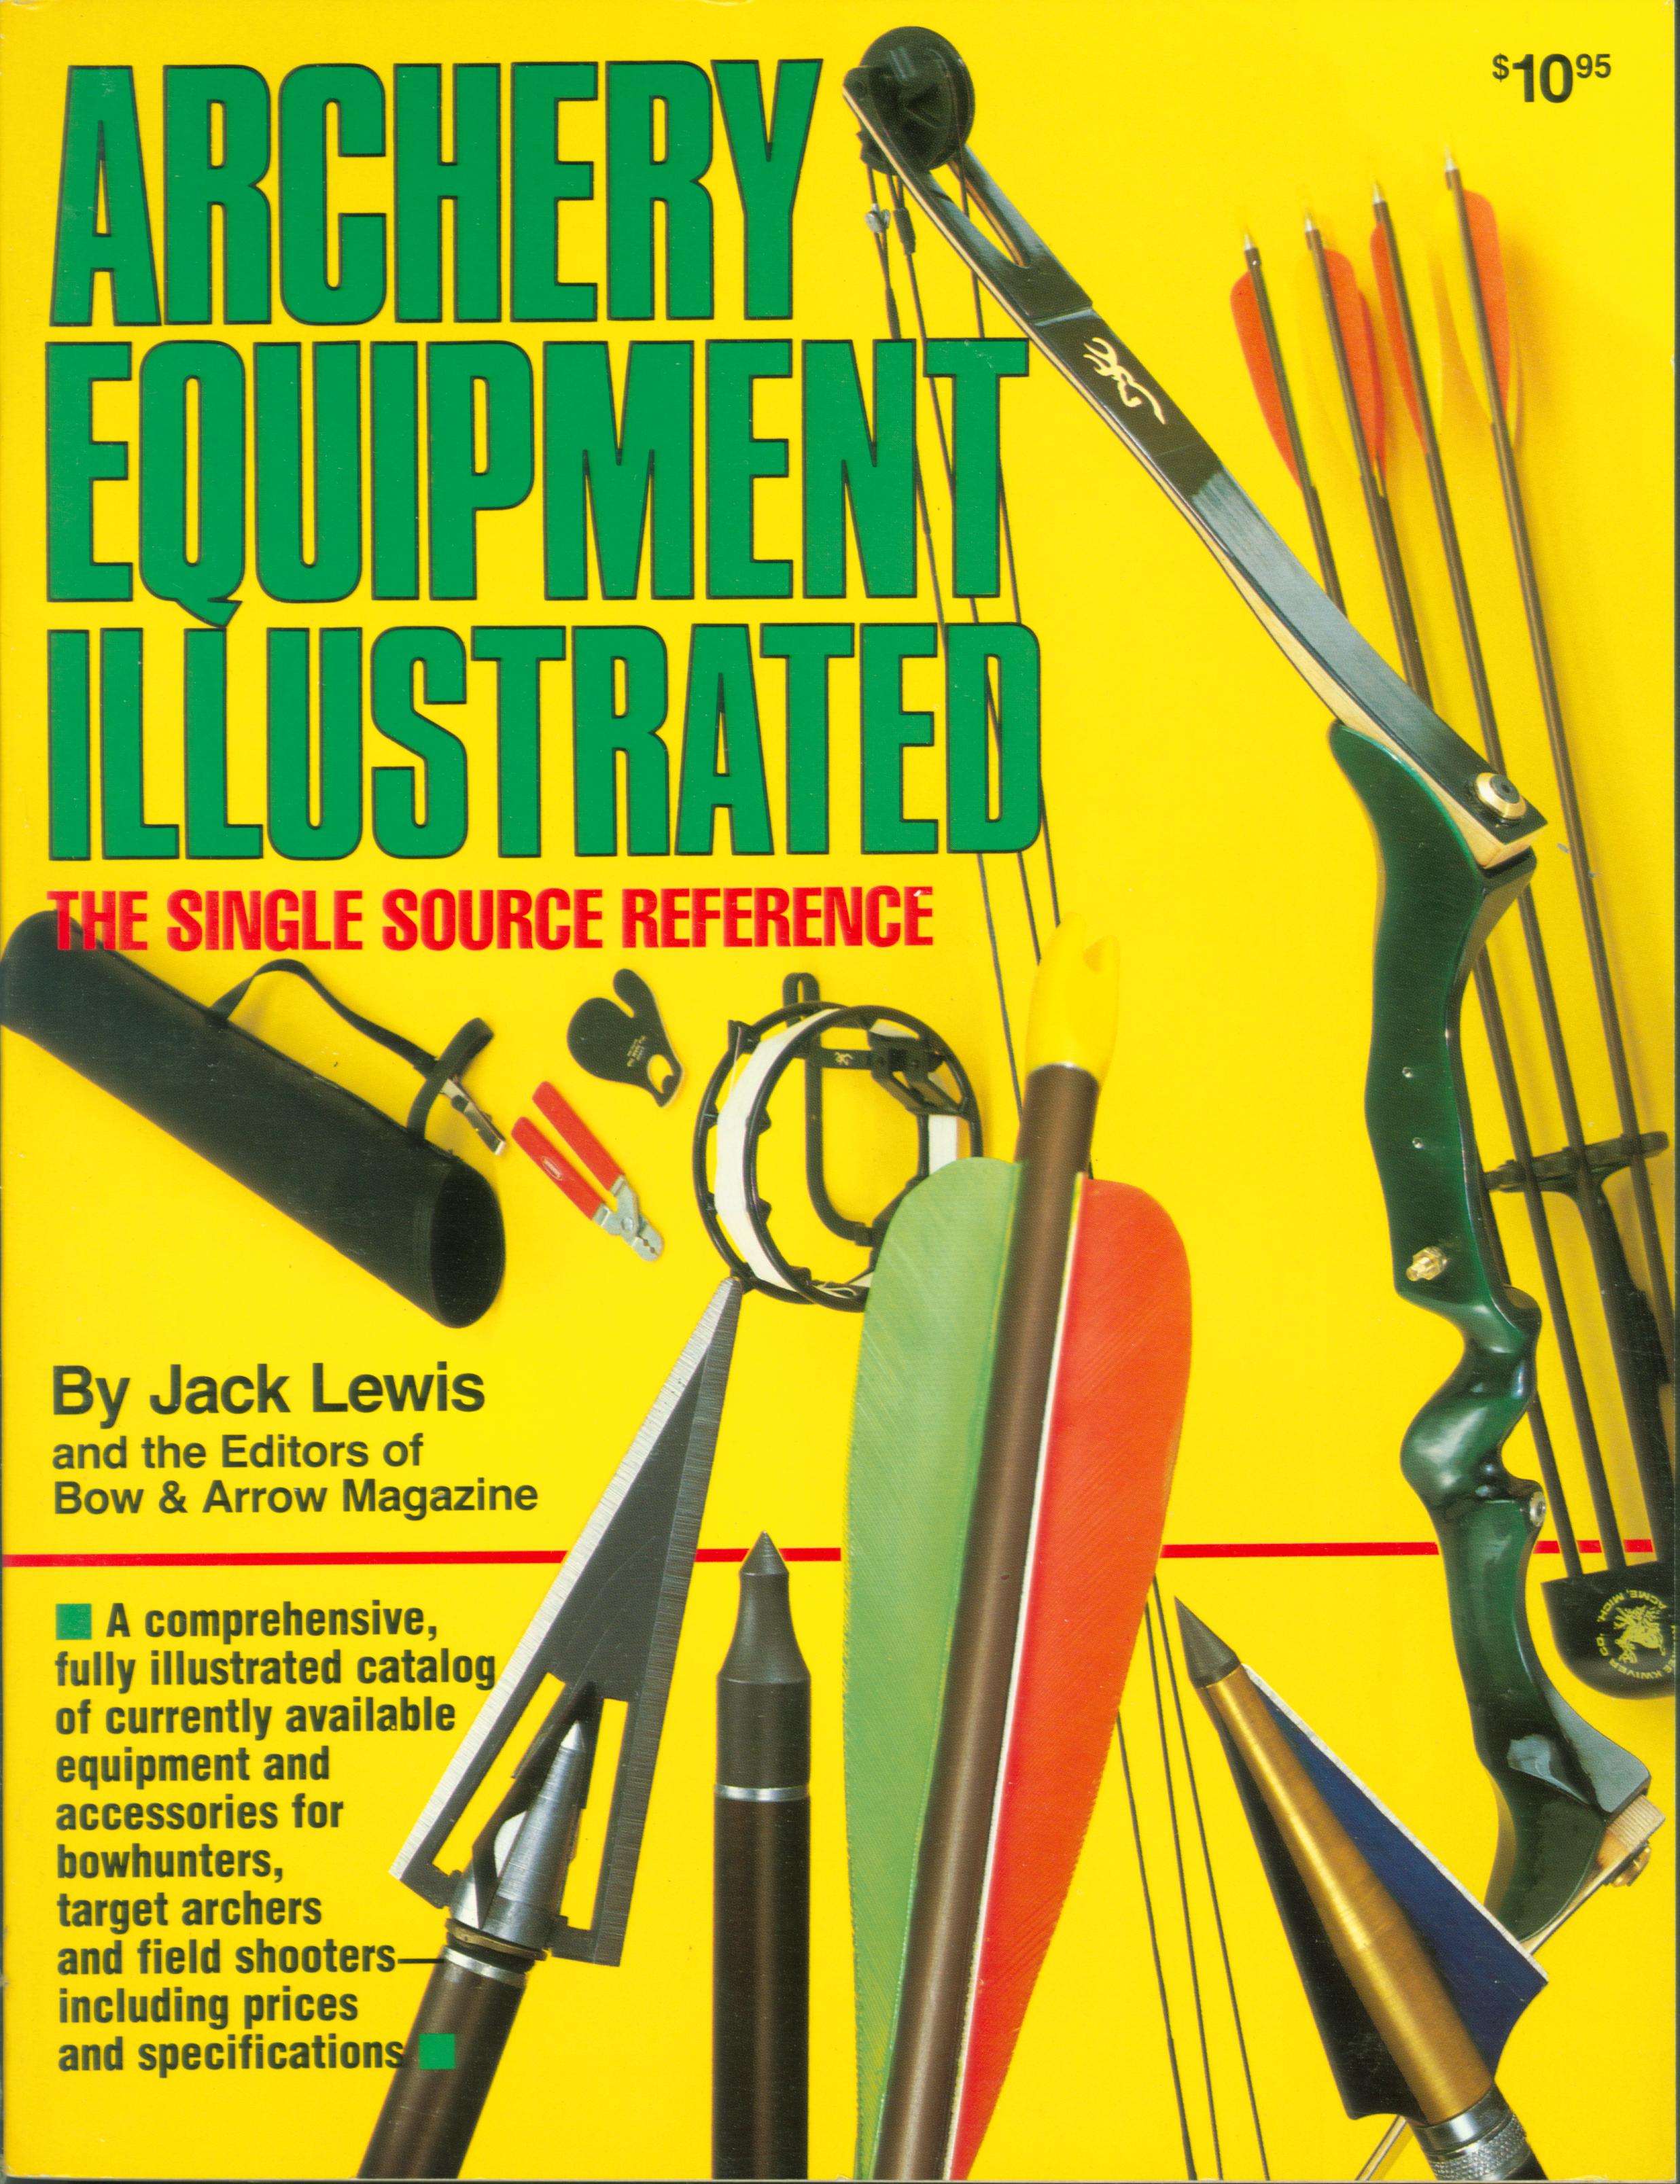 ARCHERY EQUIPMENT ILLUSTRATED: the single source reference.